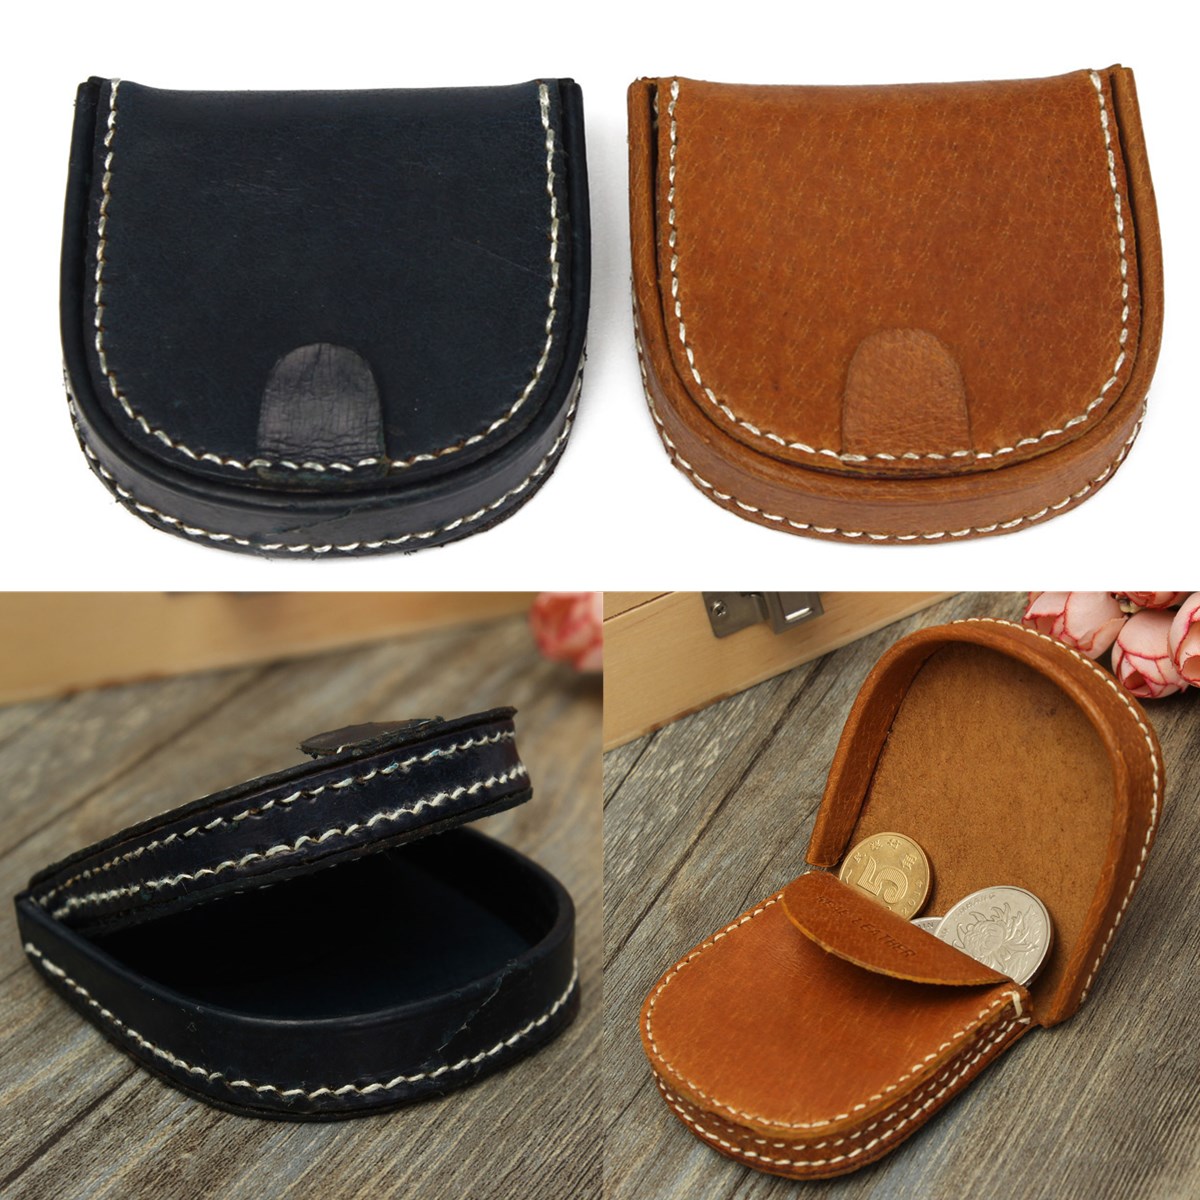 Men Women Real Leather Coin Wallet Coins Purse Purse Small Change Pouch Holder | eBay